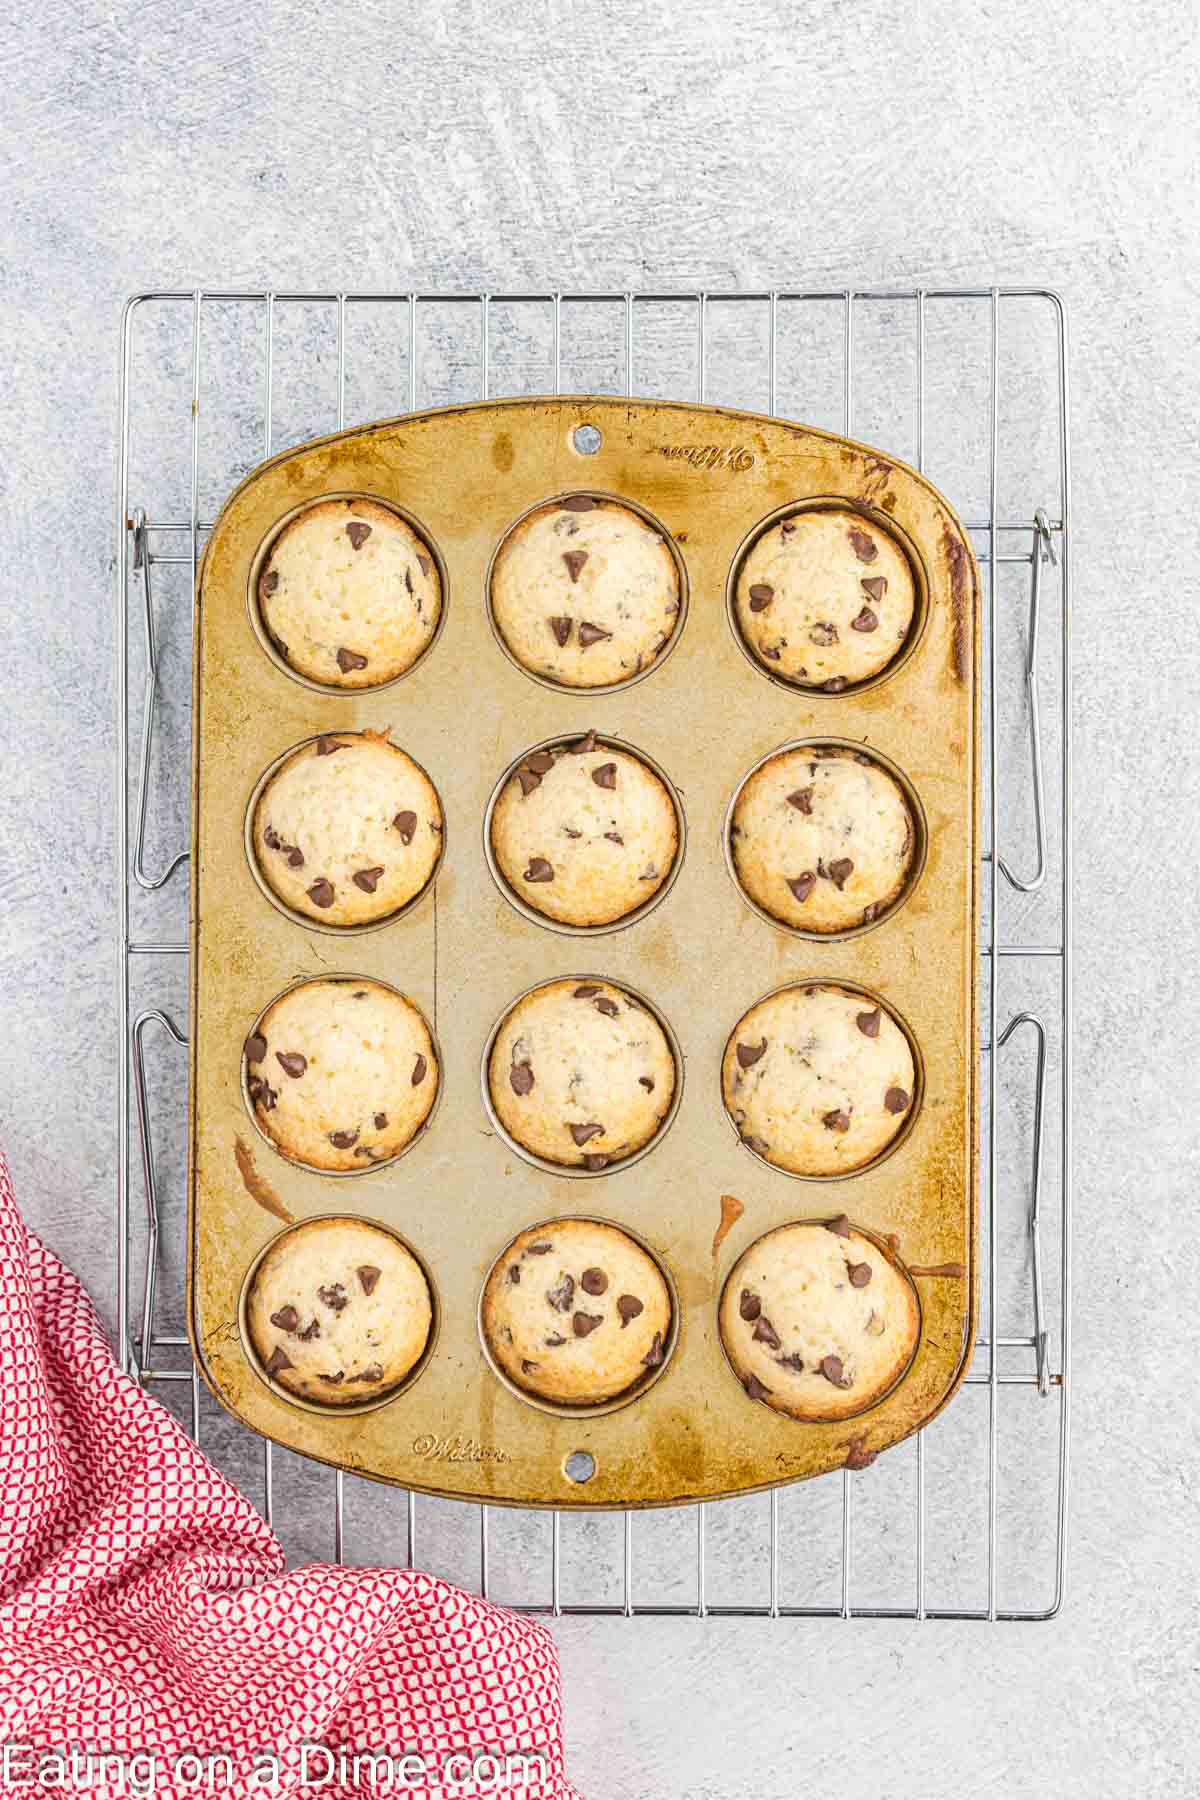 Baked chocolate chip muffins in the muffin pan